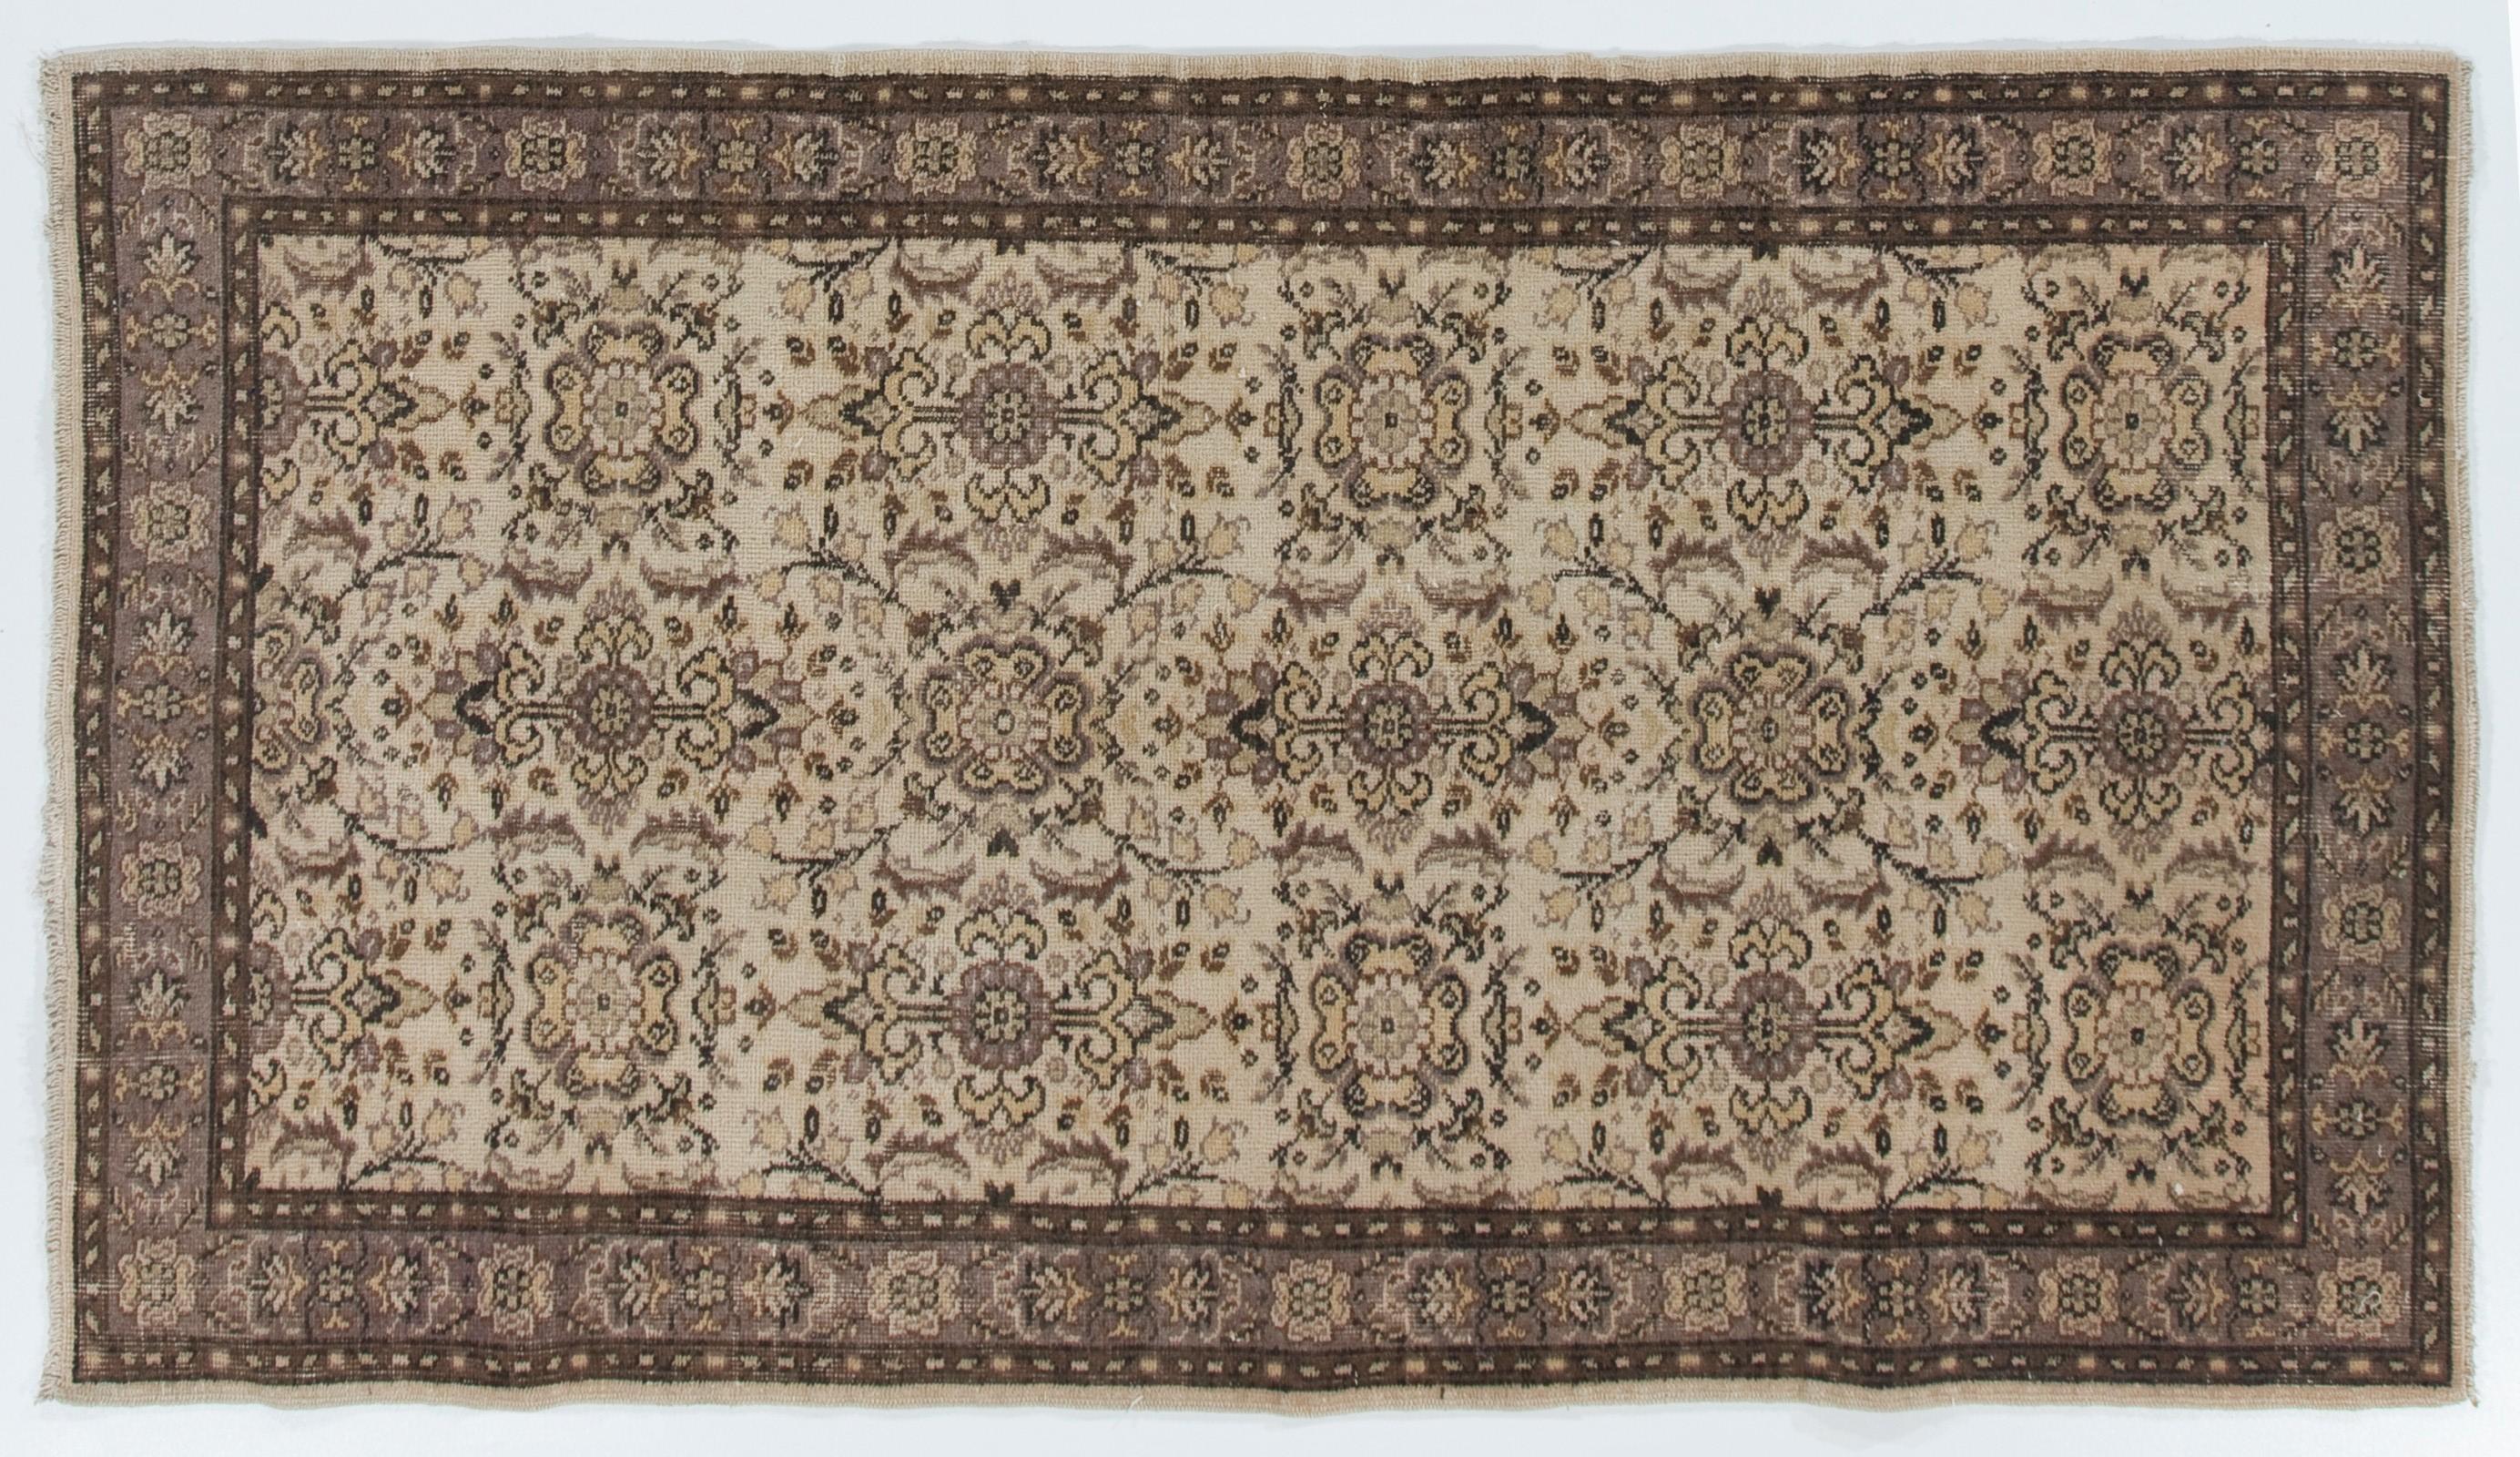 20th Century 4x7 ft Handmade Mid-Century Turkish Oushak Carpet with All-Over Floral Design For Sale